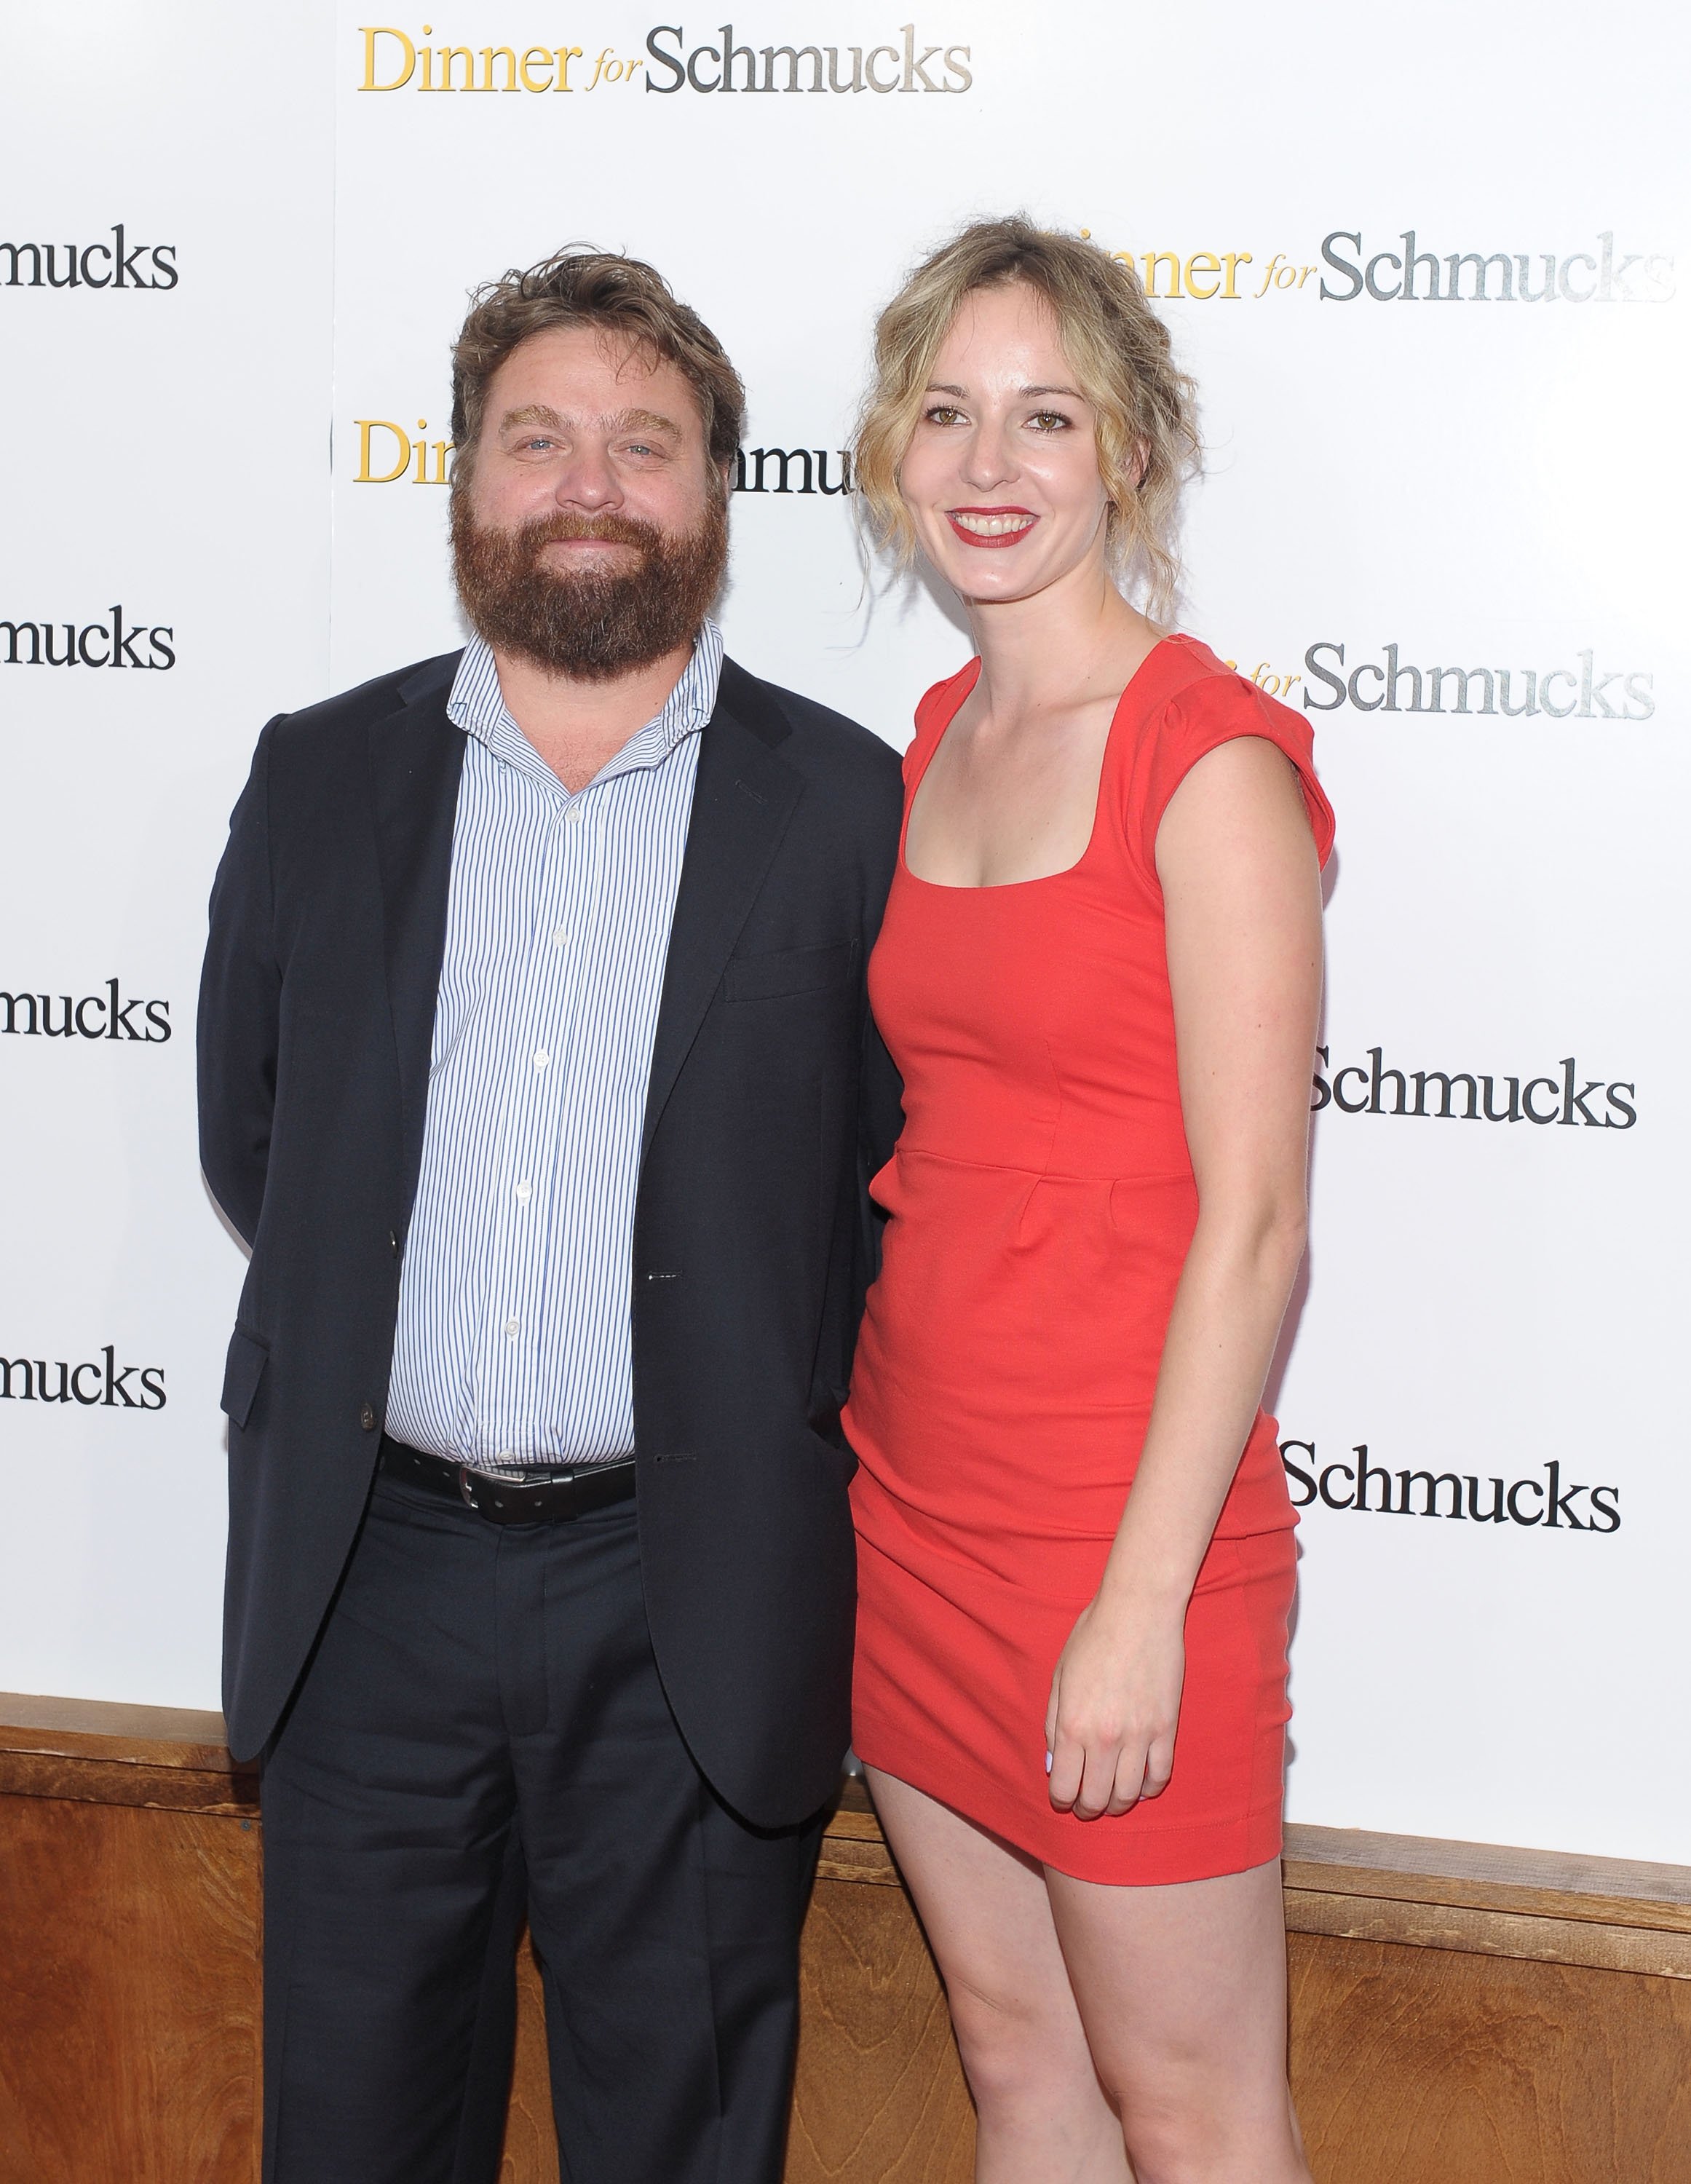 Zach Galifianakis and Quinn Lundberg attend the "Dinner For Schmucks" premiere at the Ziegfeld Theatre on July 19, 2010 in New York City. | Source: Getty Images 